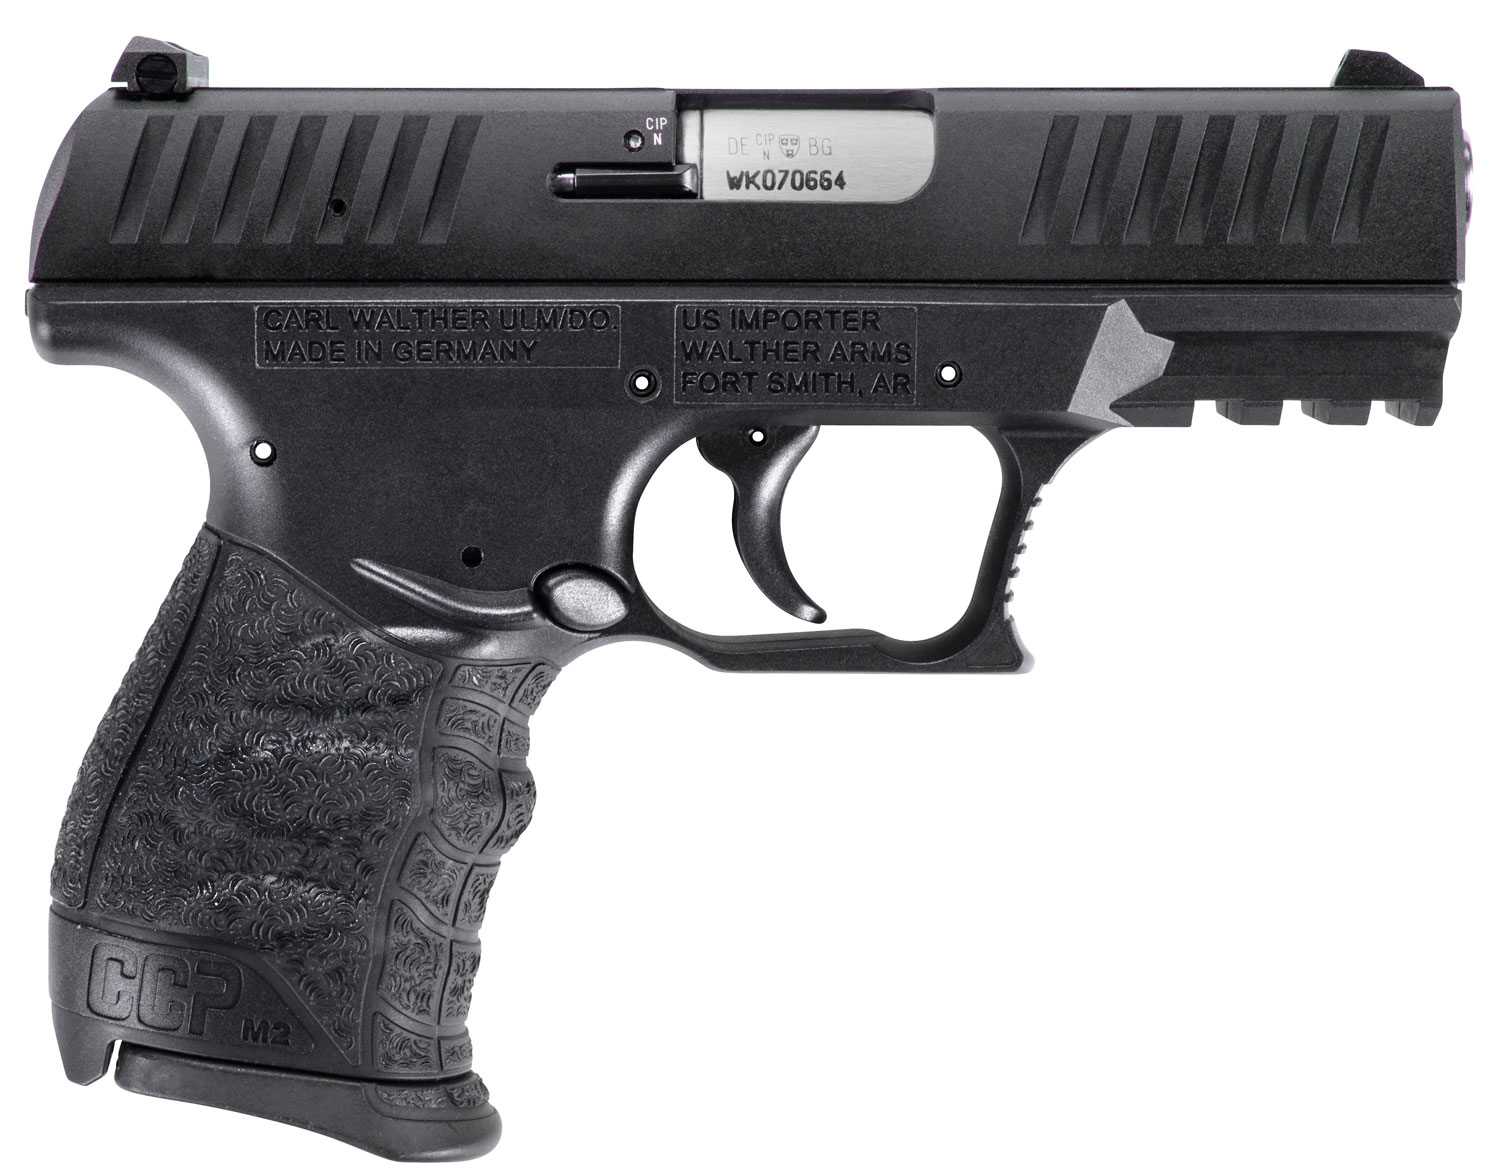 WALTHER 5082500 CCP/M2 380 3.54              BLK   8RD